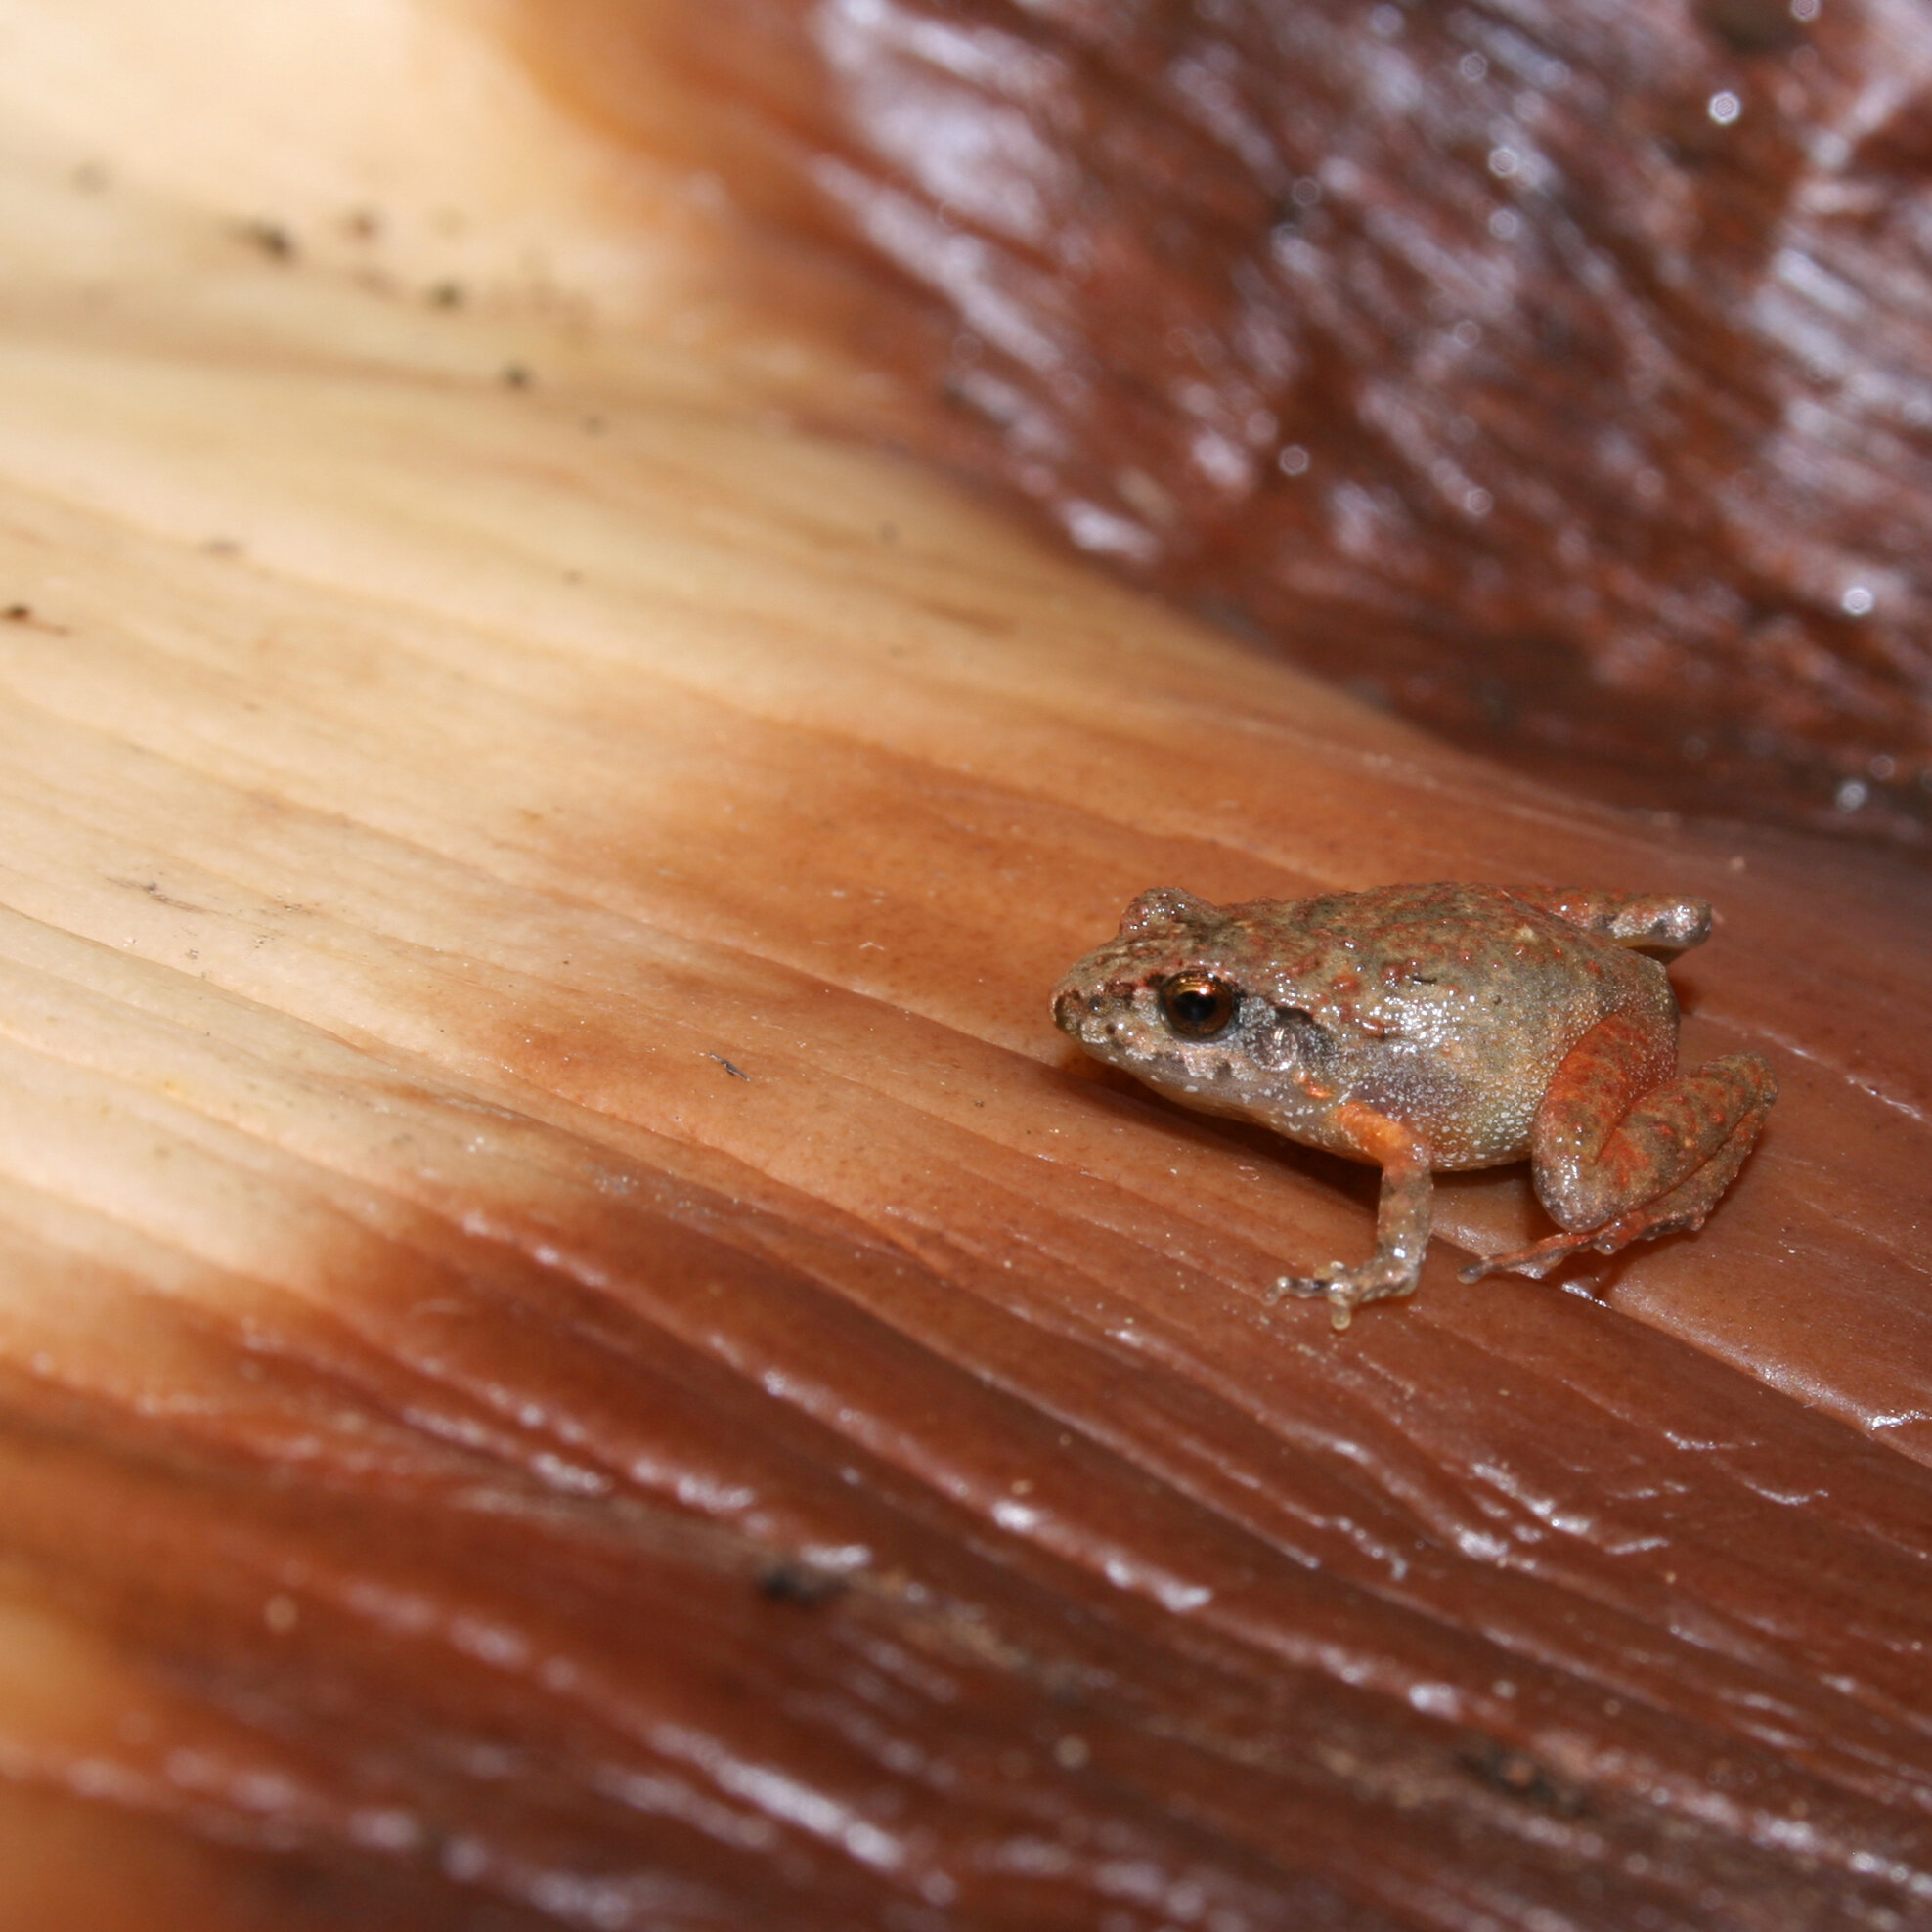 Six new species of tiny frog discovered in Mexico